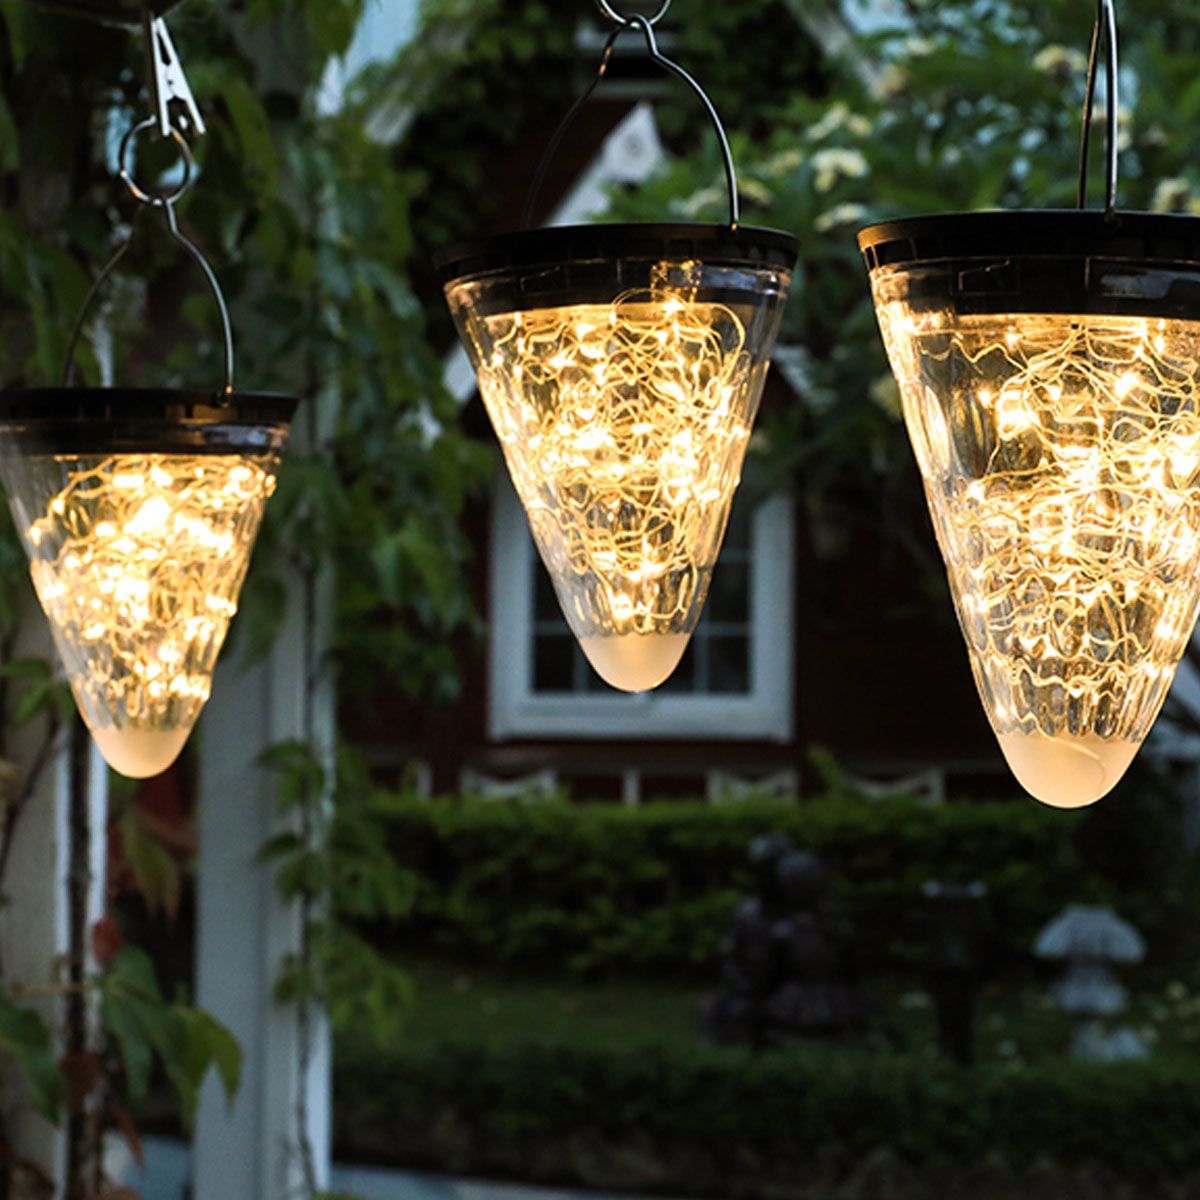 Wind-Chimes-Solar-Powered-LED-Light-Changing-Hanging-Garden-Yard-Outdoor-Decor-1726611